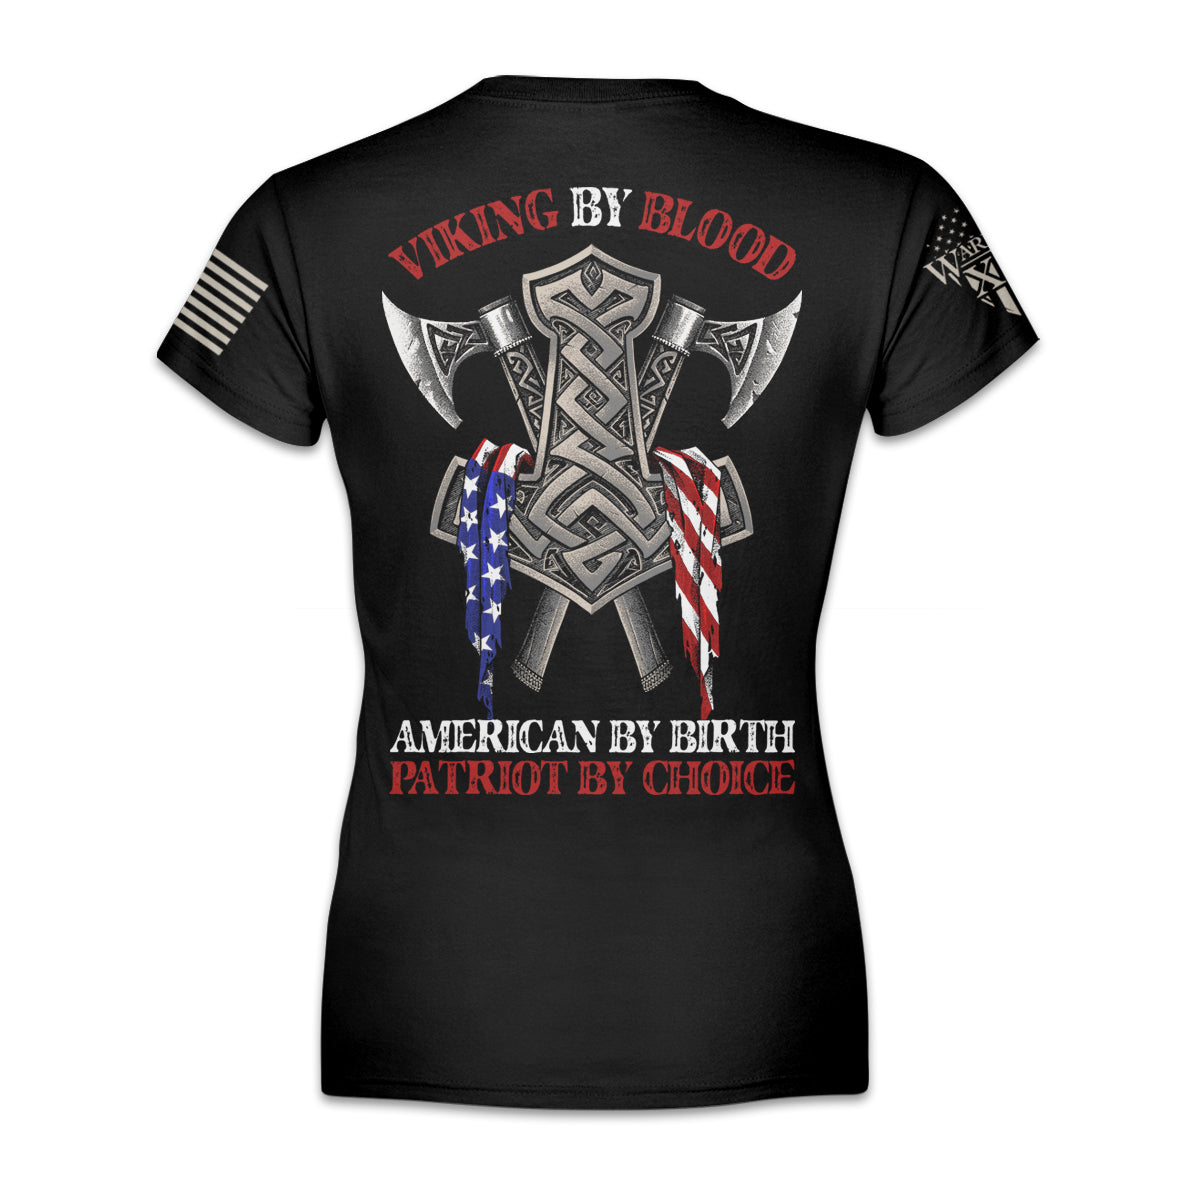 A black women's relaxed fit'shirt with the words "Viking by blood, American by birth, patriot by choice" with viking axes printed and an American flag printed on the back of the shirt.